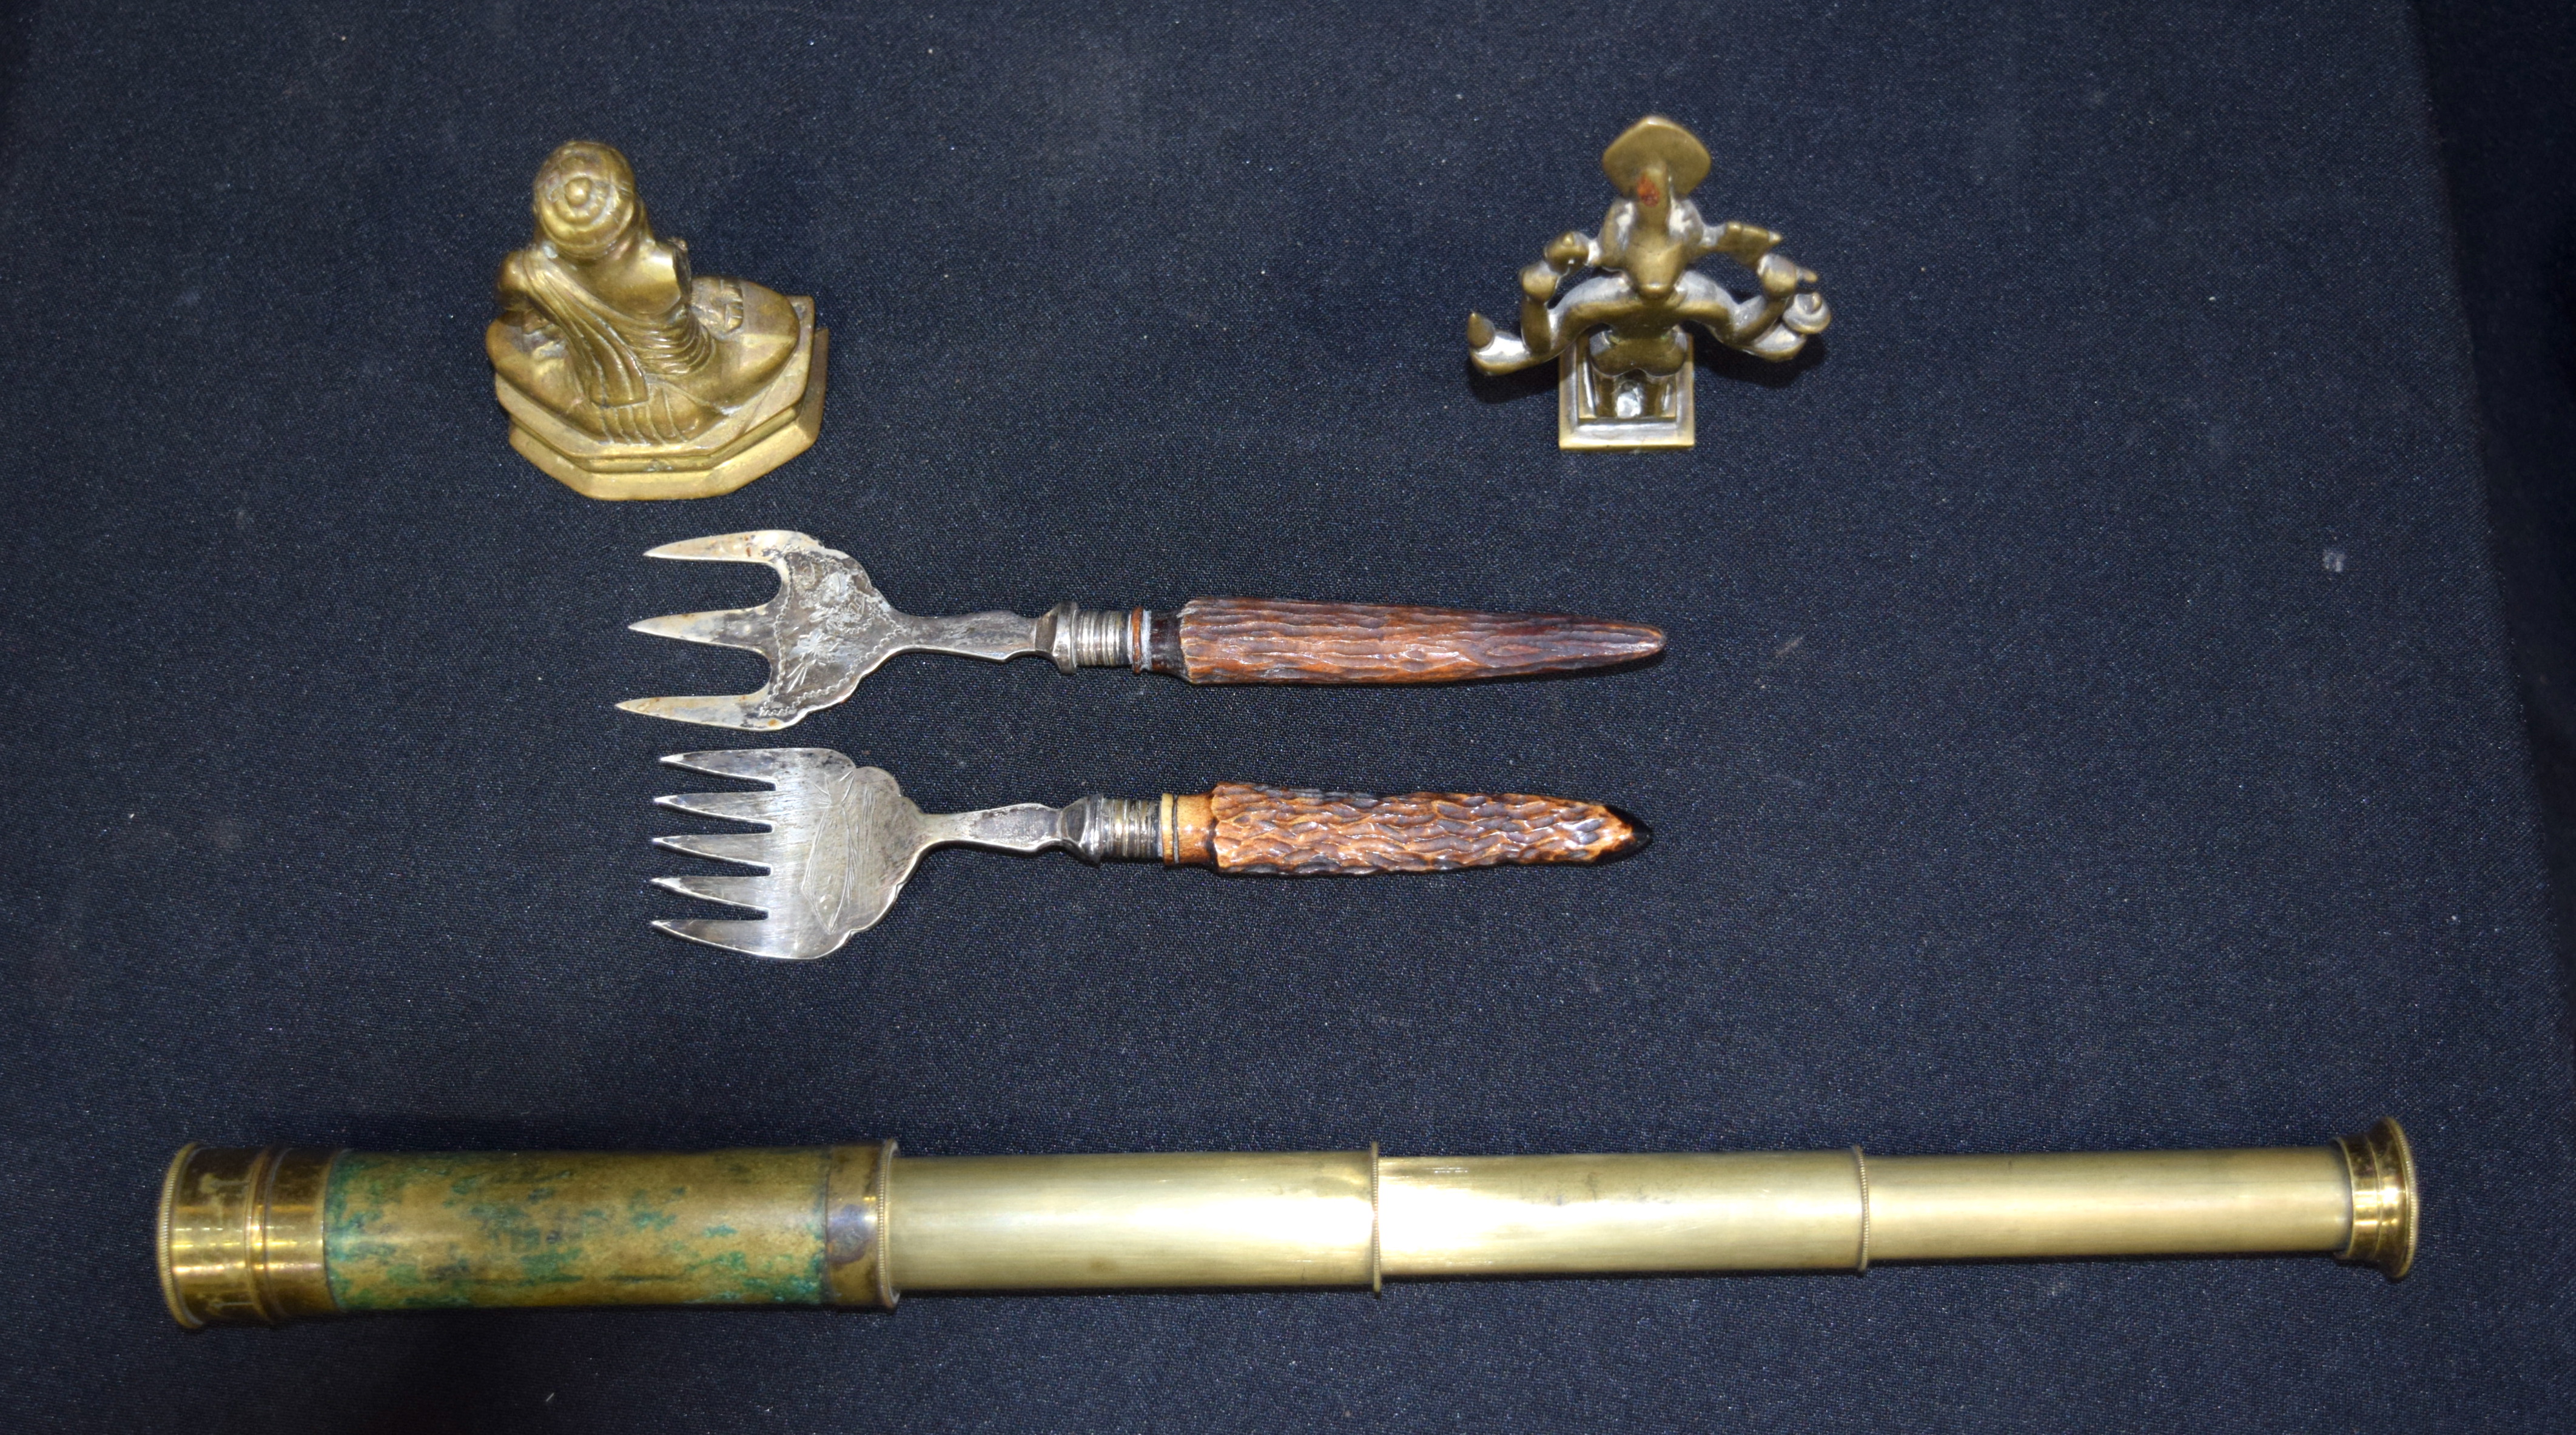 A vintage Telescope 13 cm long, 2 silver plated forks and 2 bronze buddhas (5) - Image 5 of 5